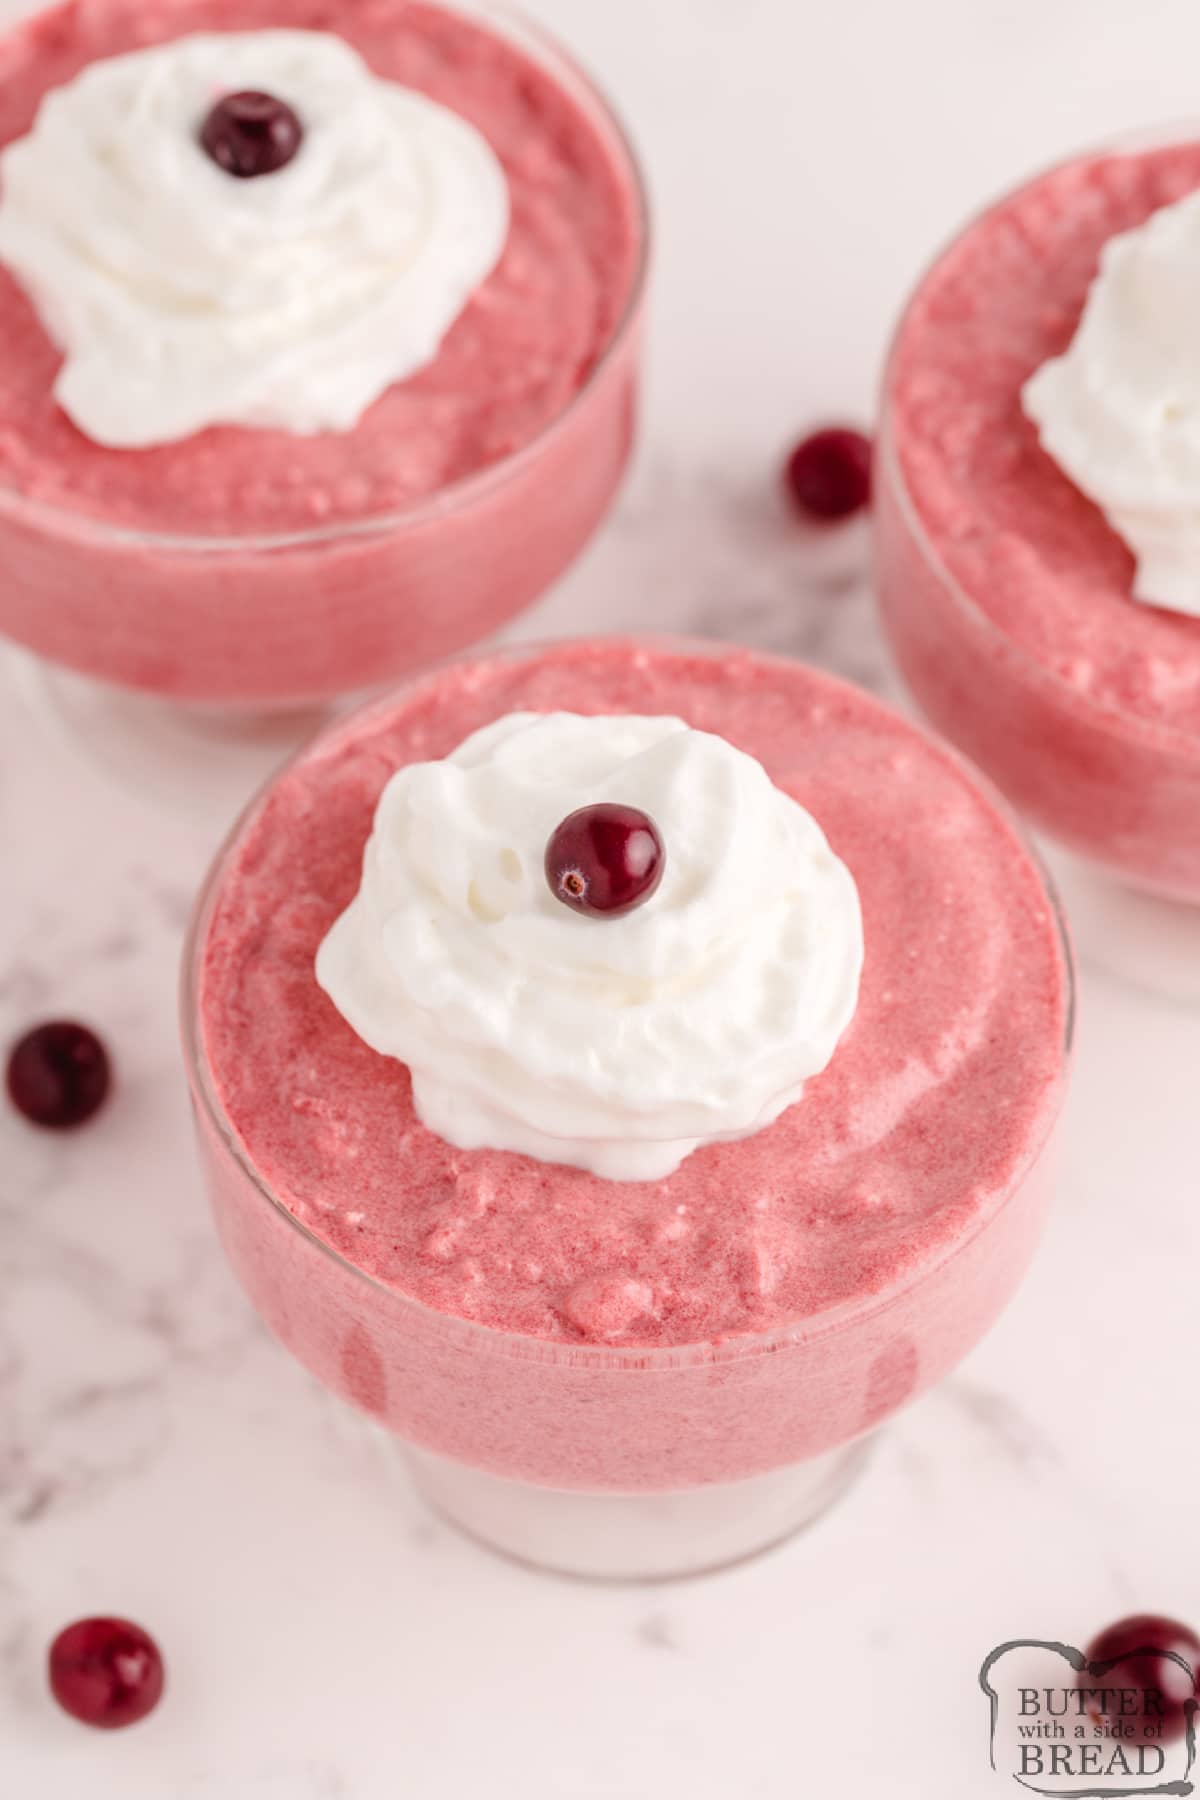 Cranberry mousse recipe made with jello and whipping cream 